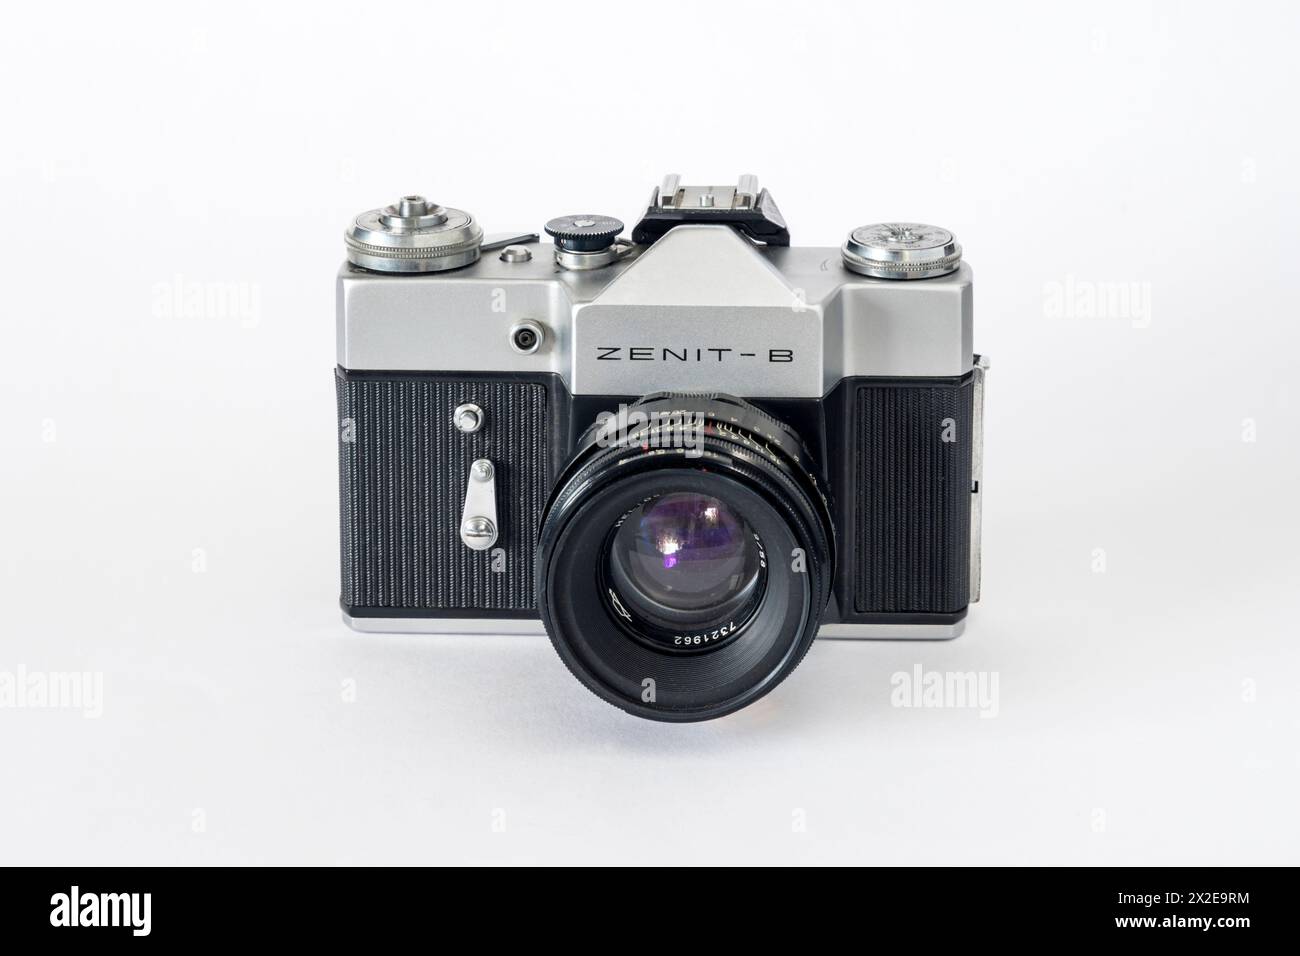 A Russian Zenit-B or Zenith-B 35mm film SLR camera with 58mm f2 Helios-44 standard lens.  Produced from 1968–1977. Stock Photo